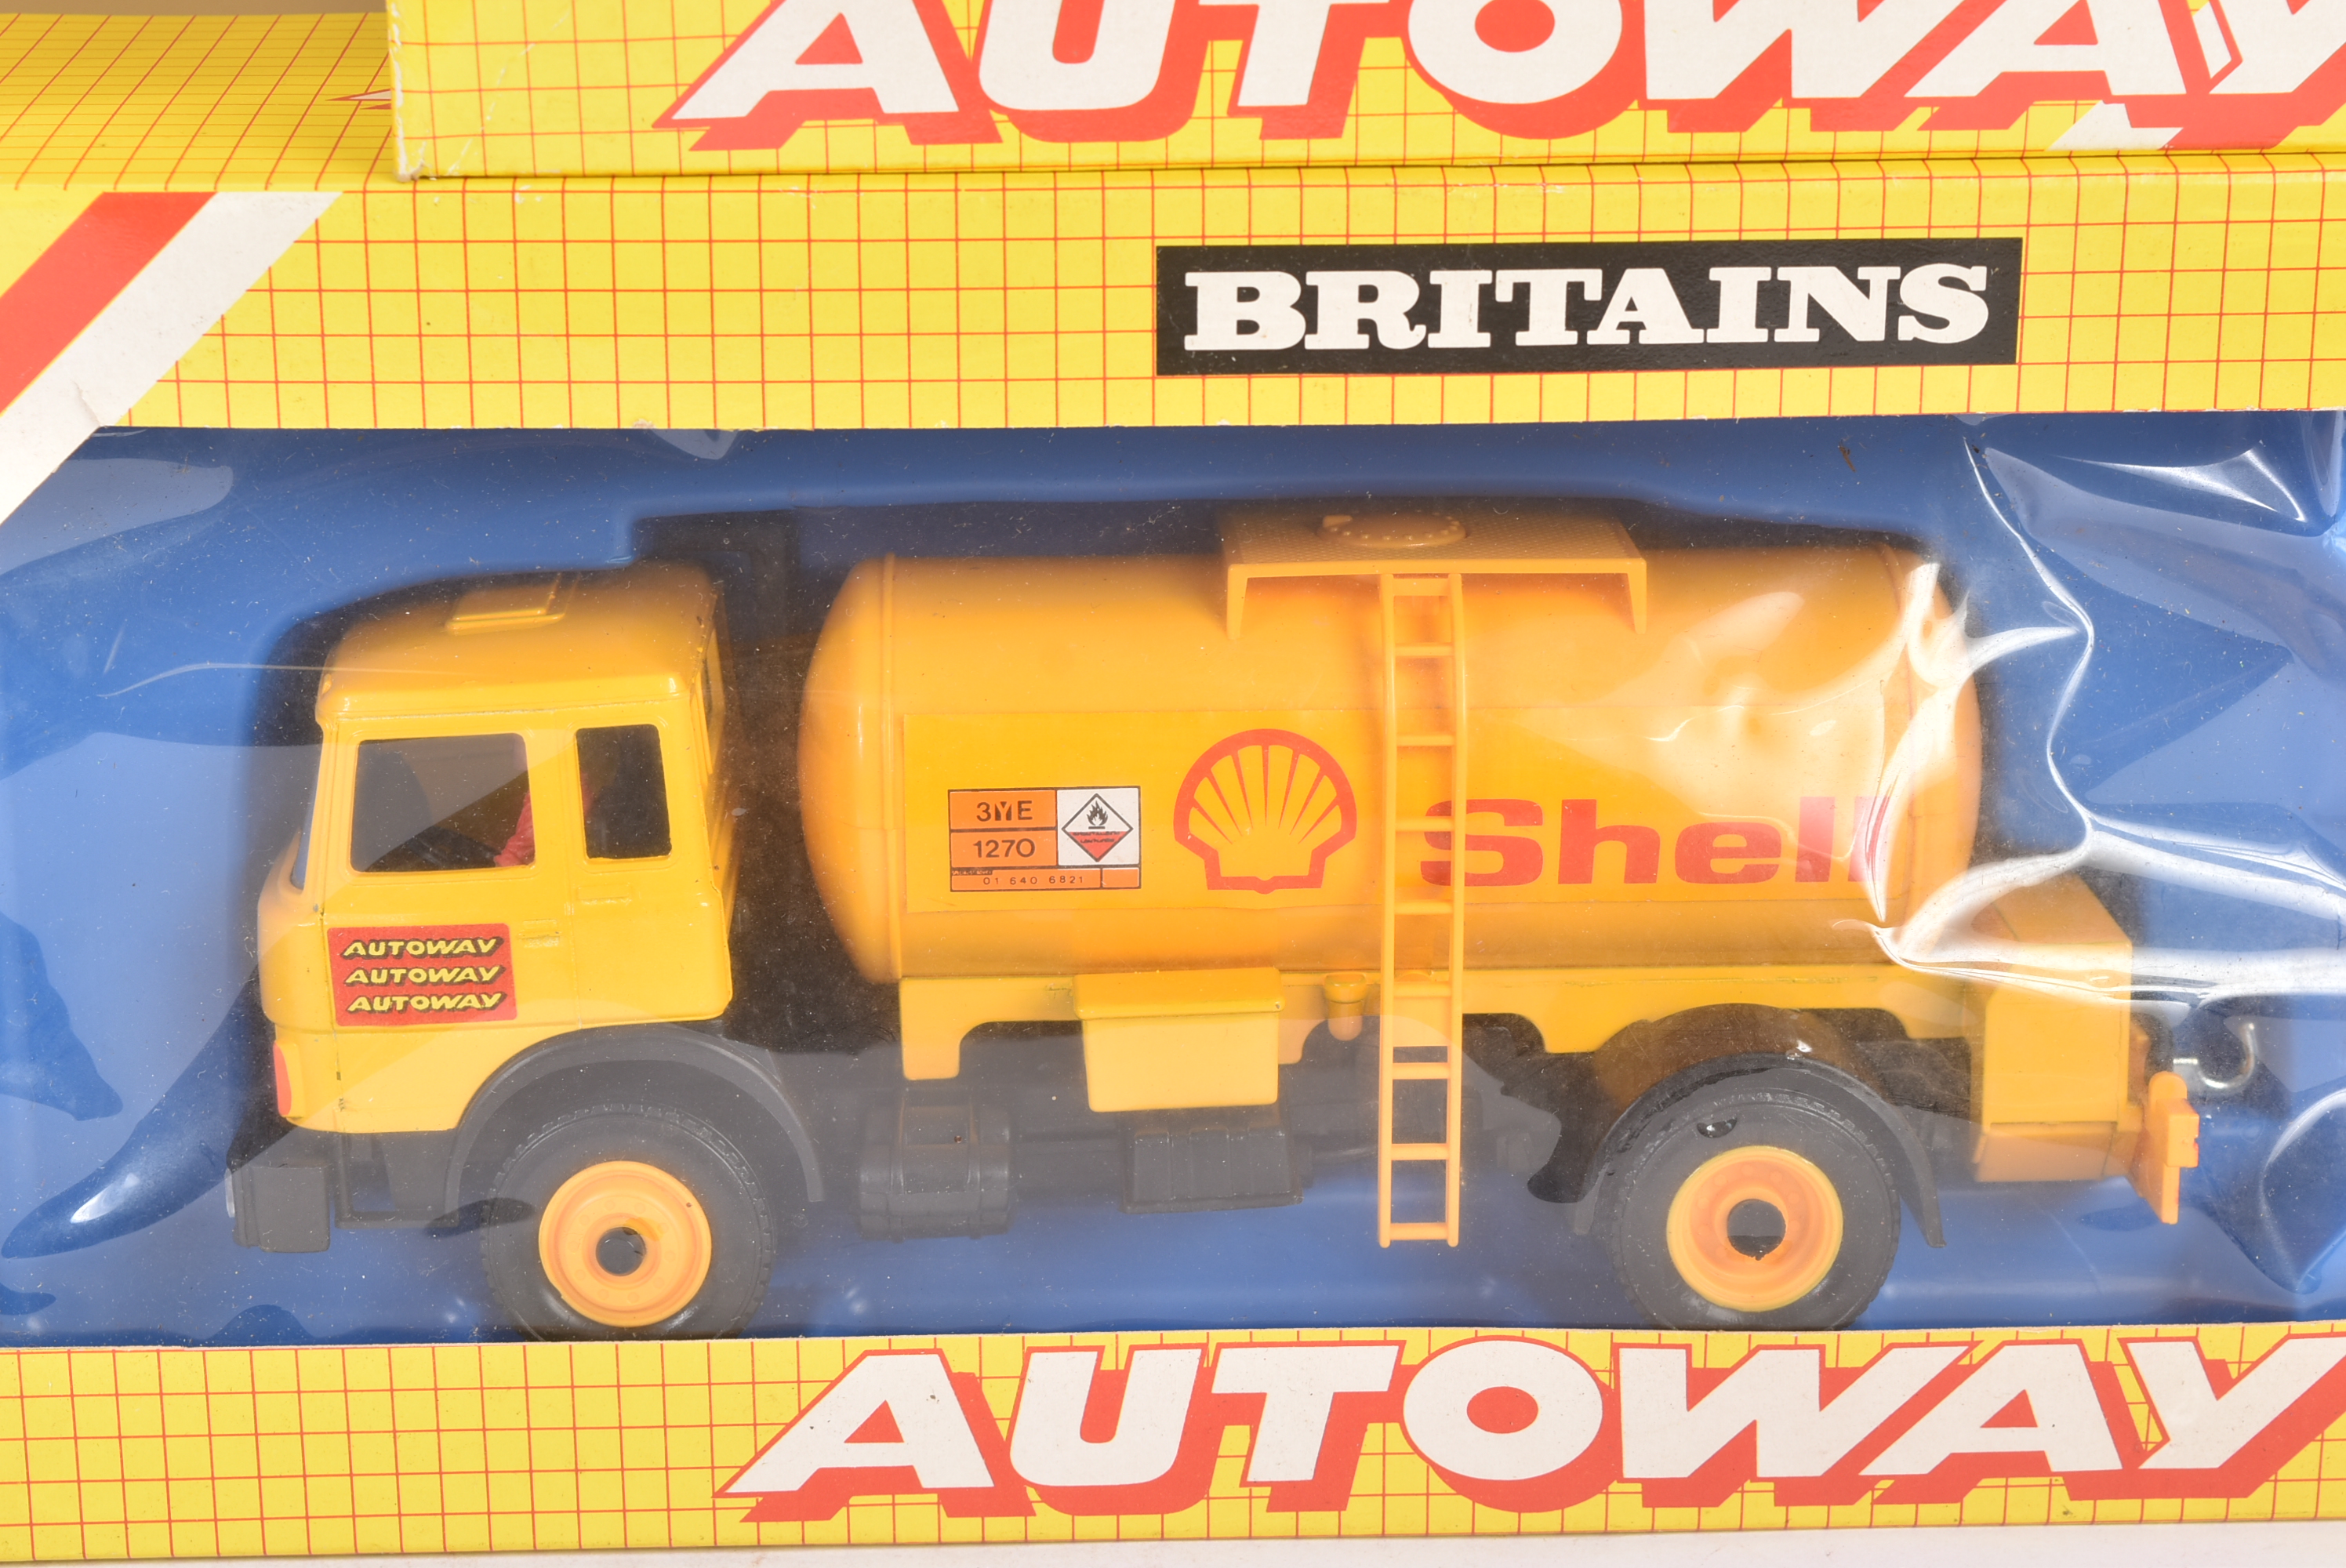 COLLECTION OF VINTAGE BRITAINS DIECAST MODELS - Image 7 of 7